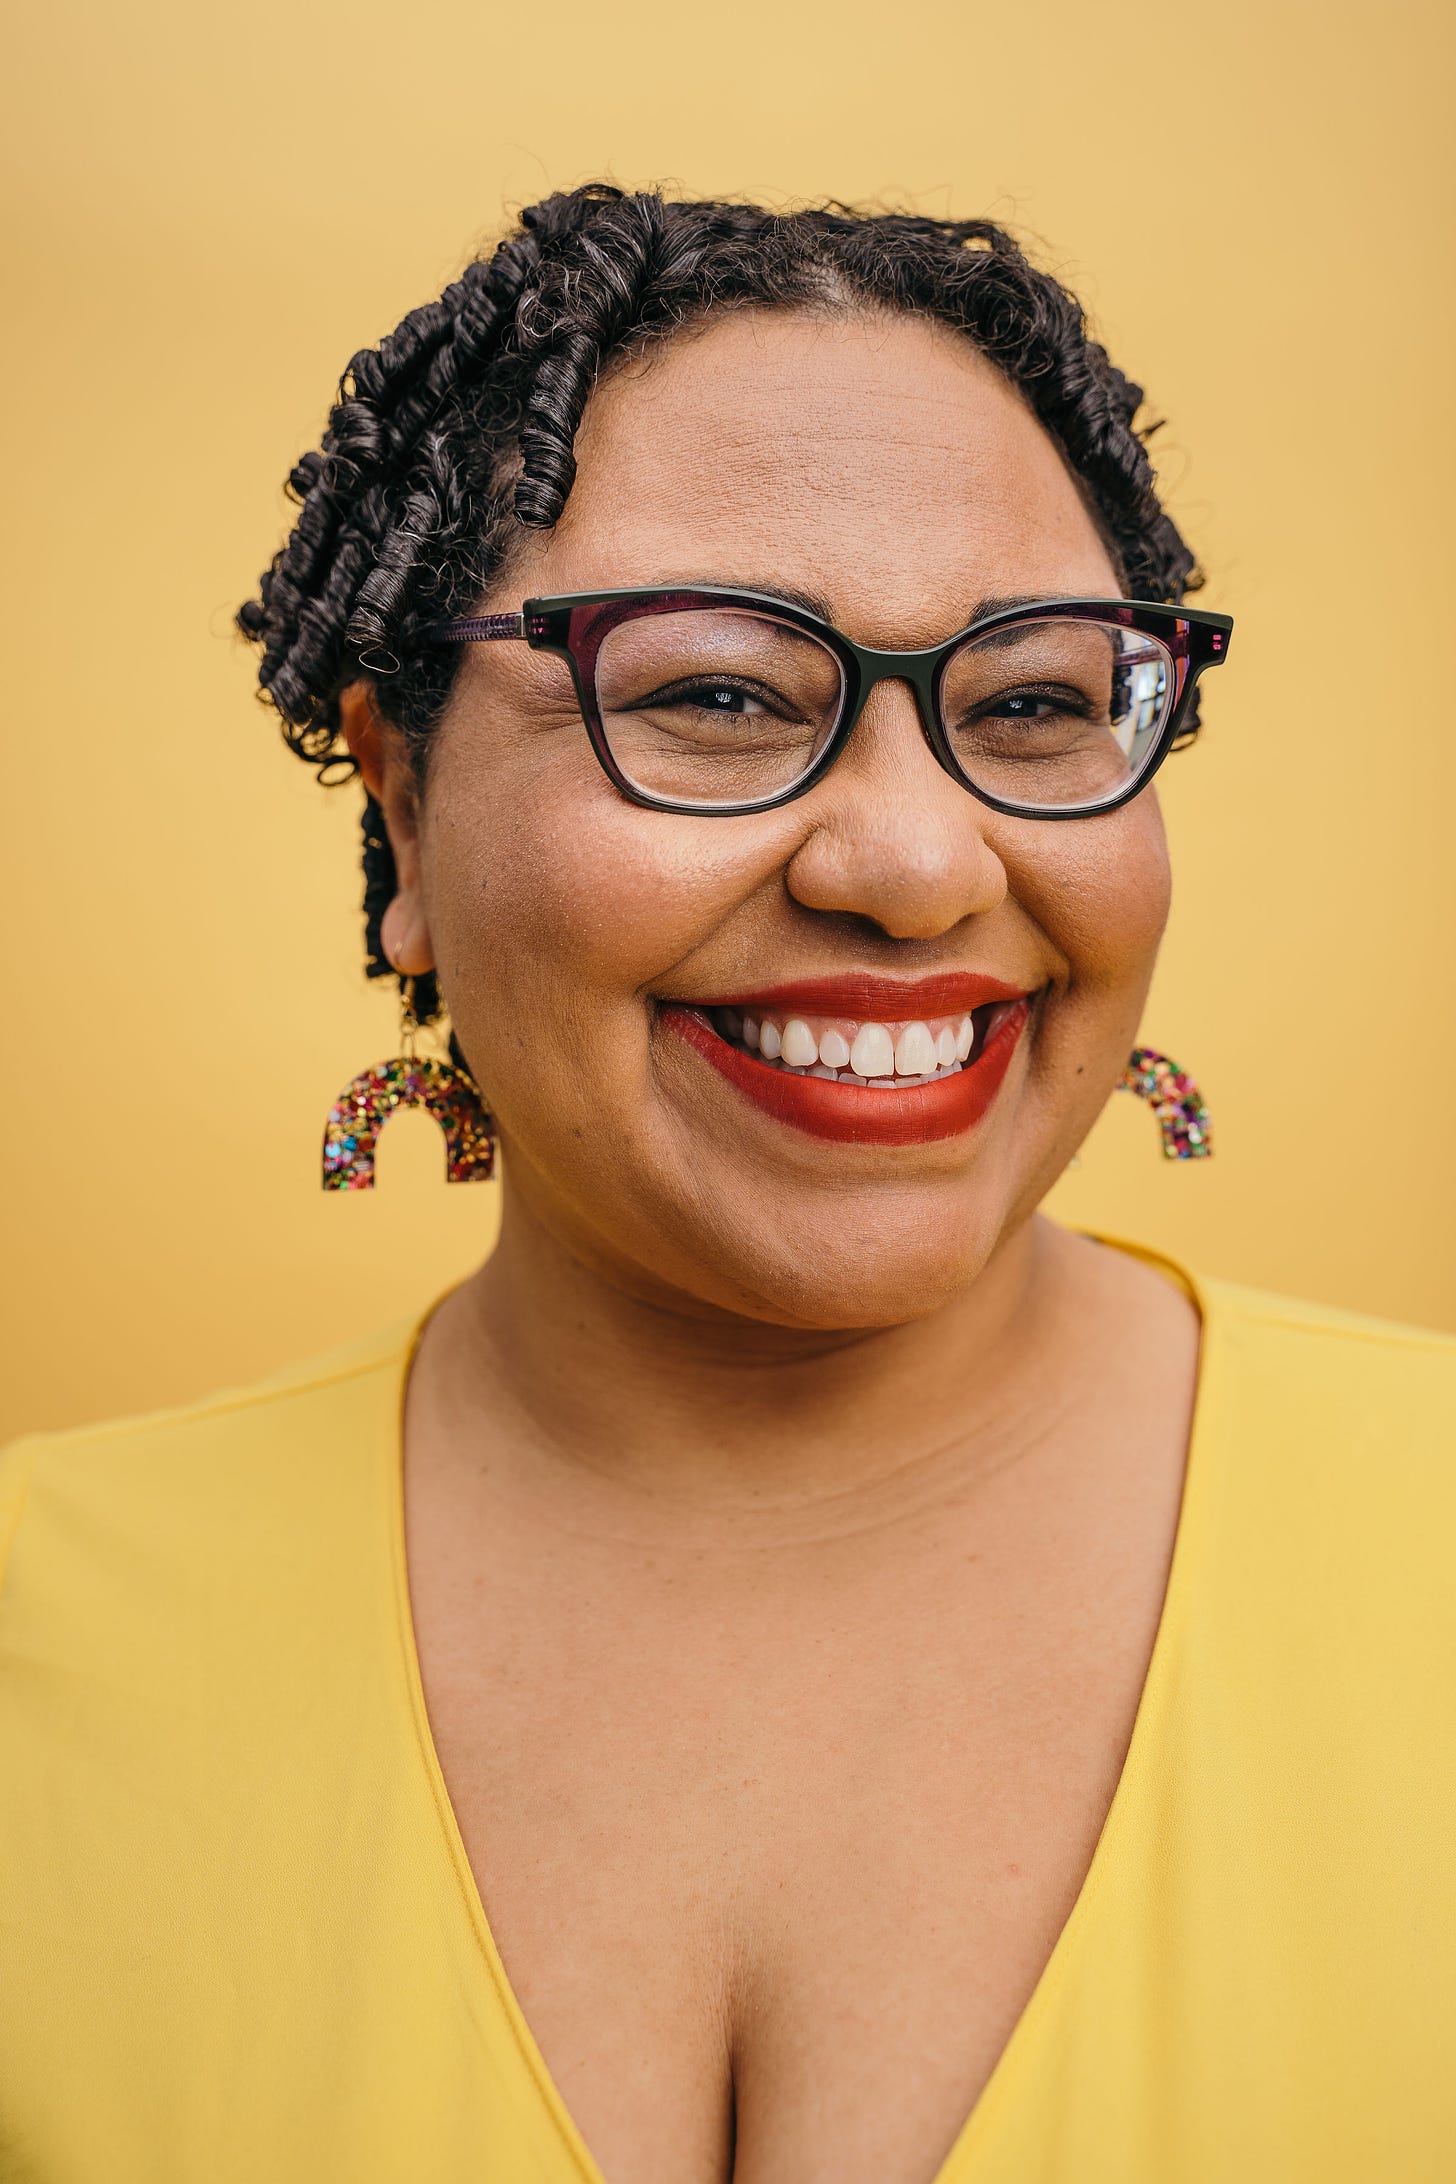 Light-skinned, short-haired Black woman smiling. She is wearing a yellow top, red lipstick, brown eyeglasses and glittery rainbow earrings. Paulius Musteikis Photography